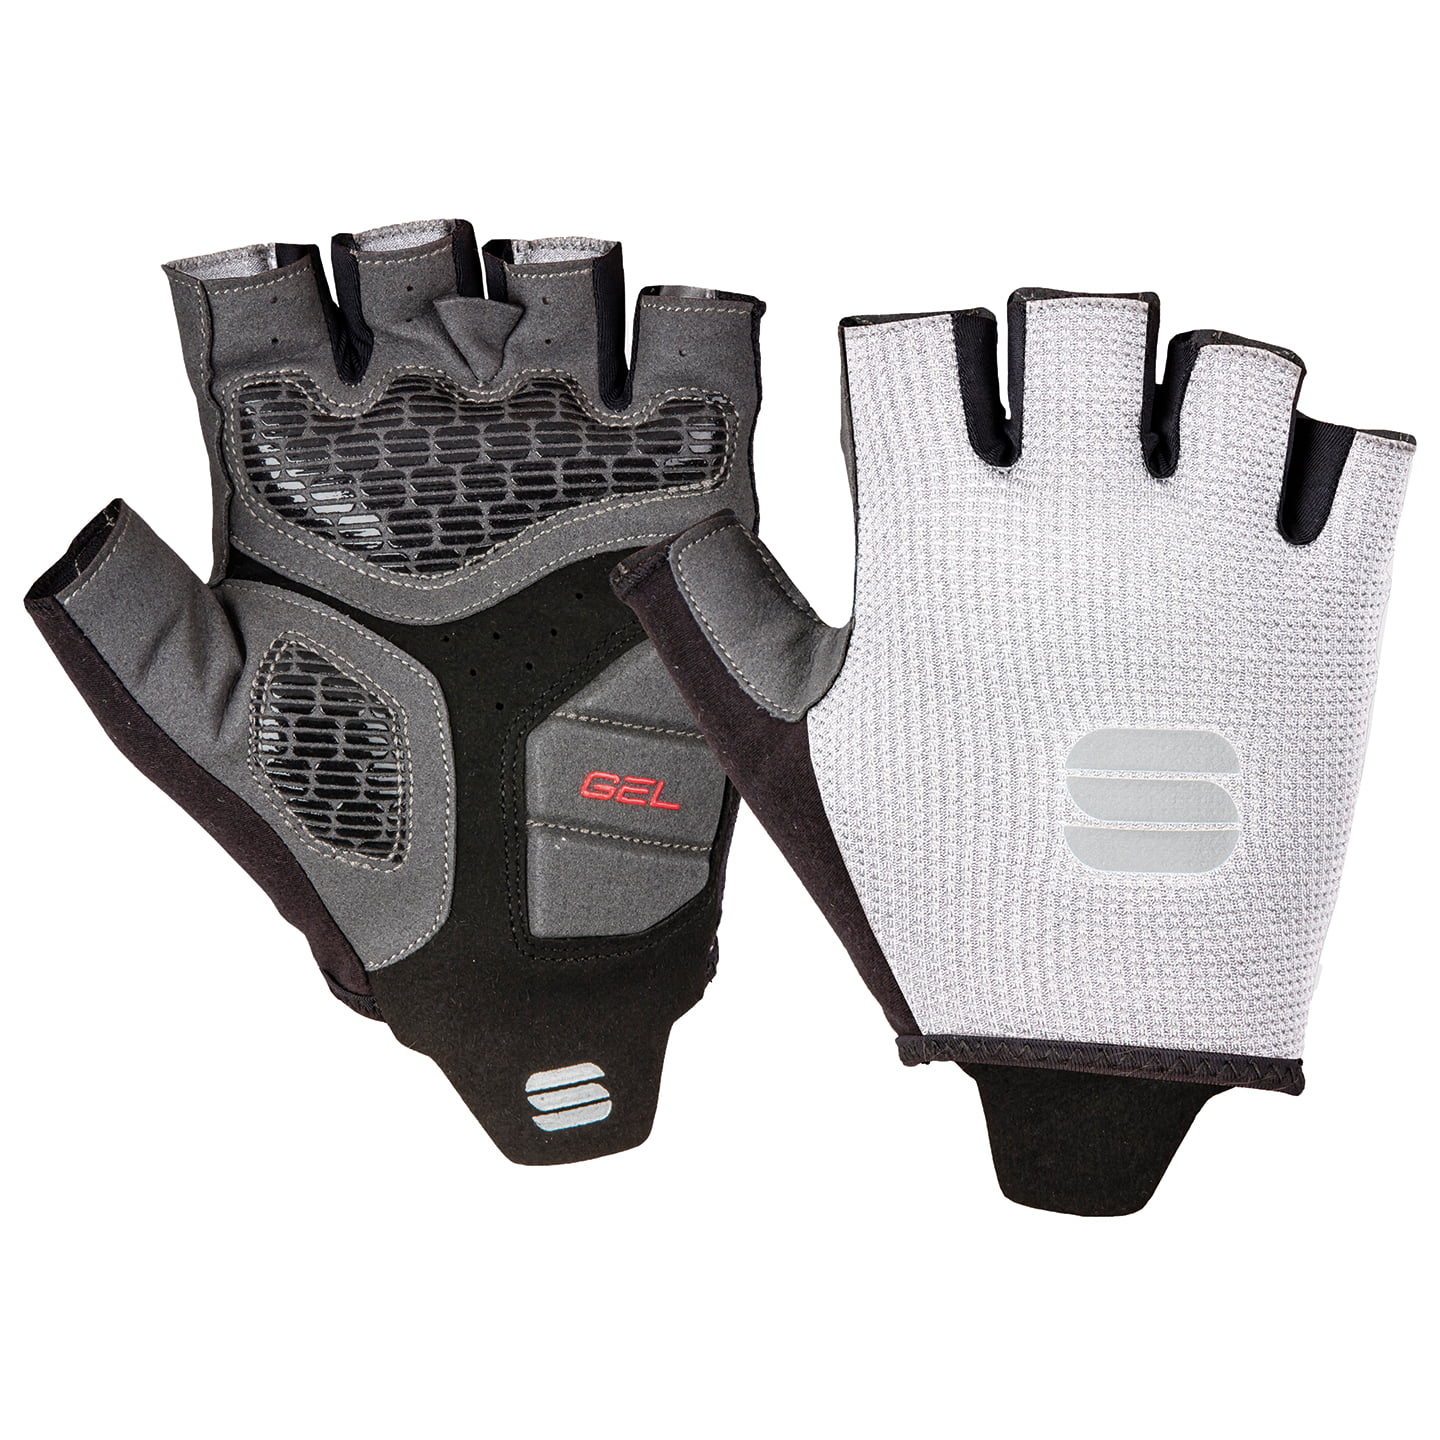 TC Gloves Cycling Gloves, for men, size L, Cycling gloves, Bike gear